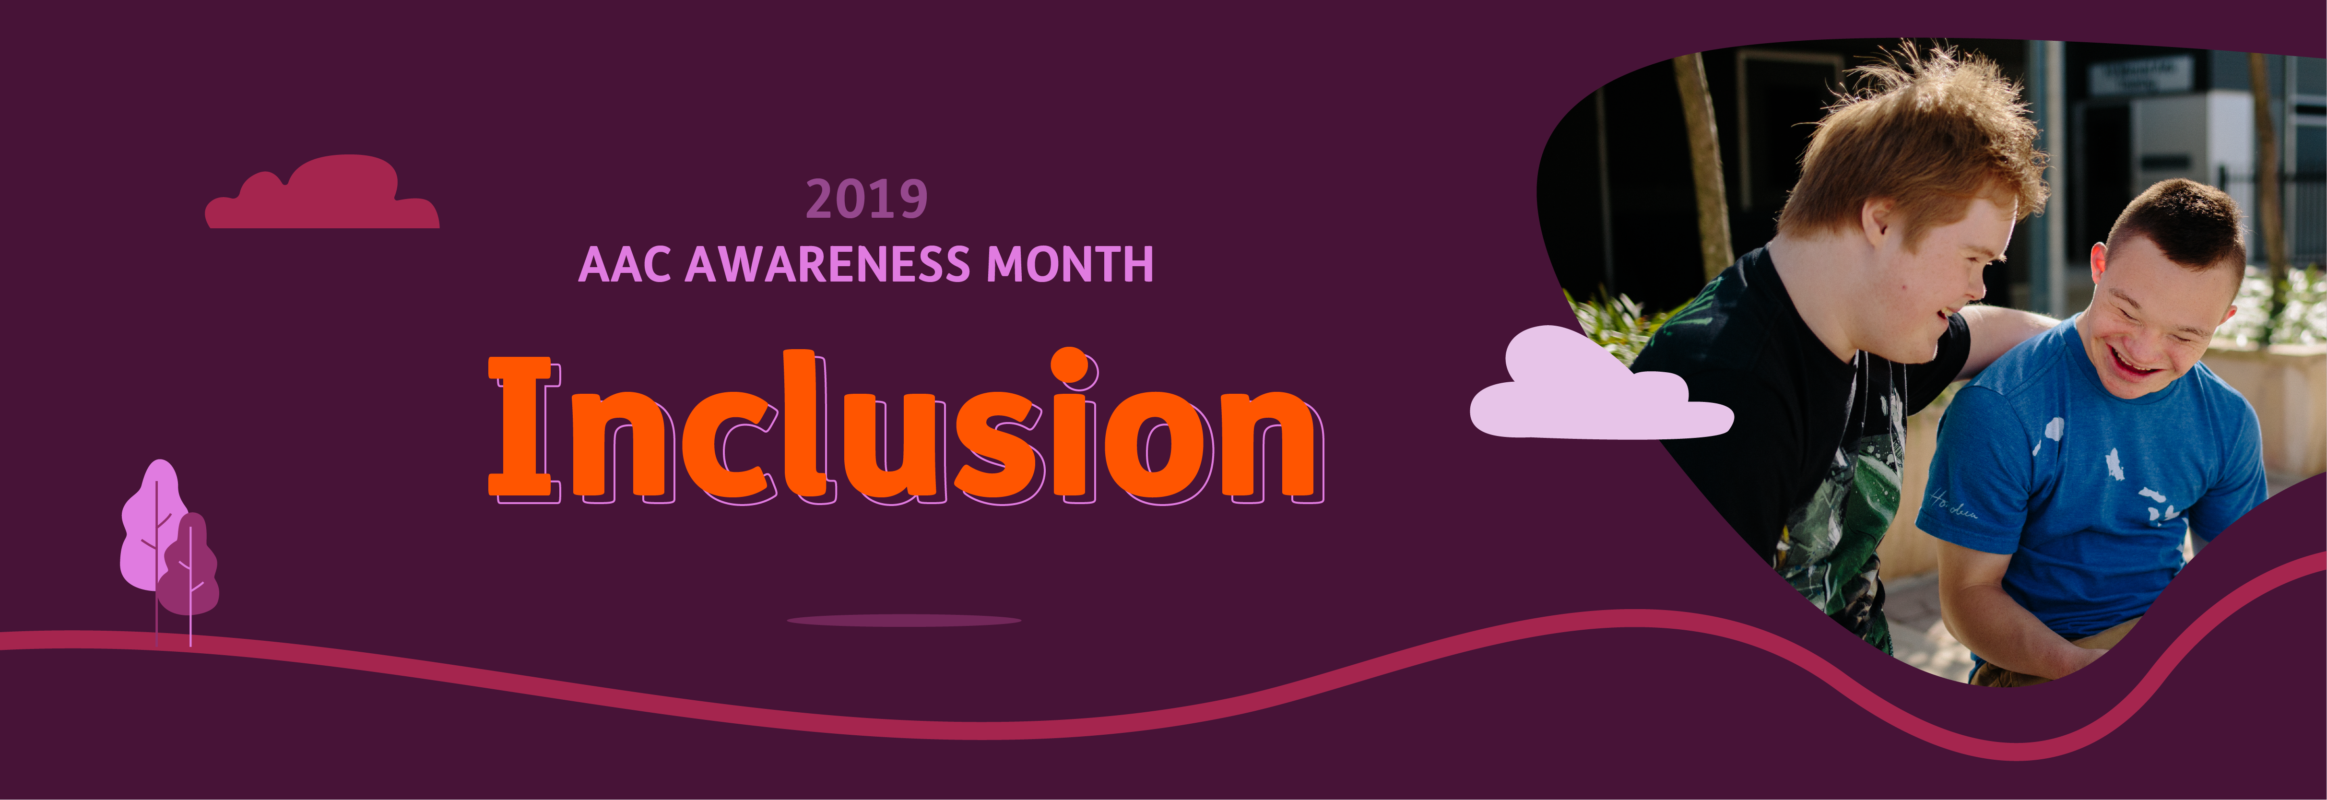 AAC Awareness Month: Inclusion